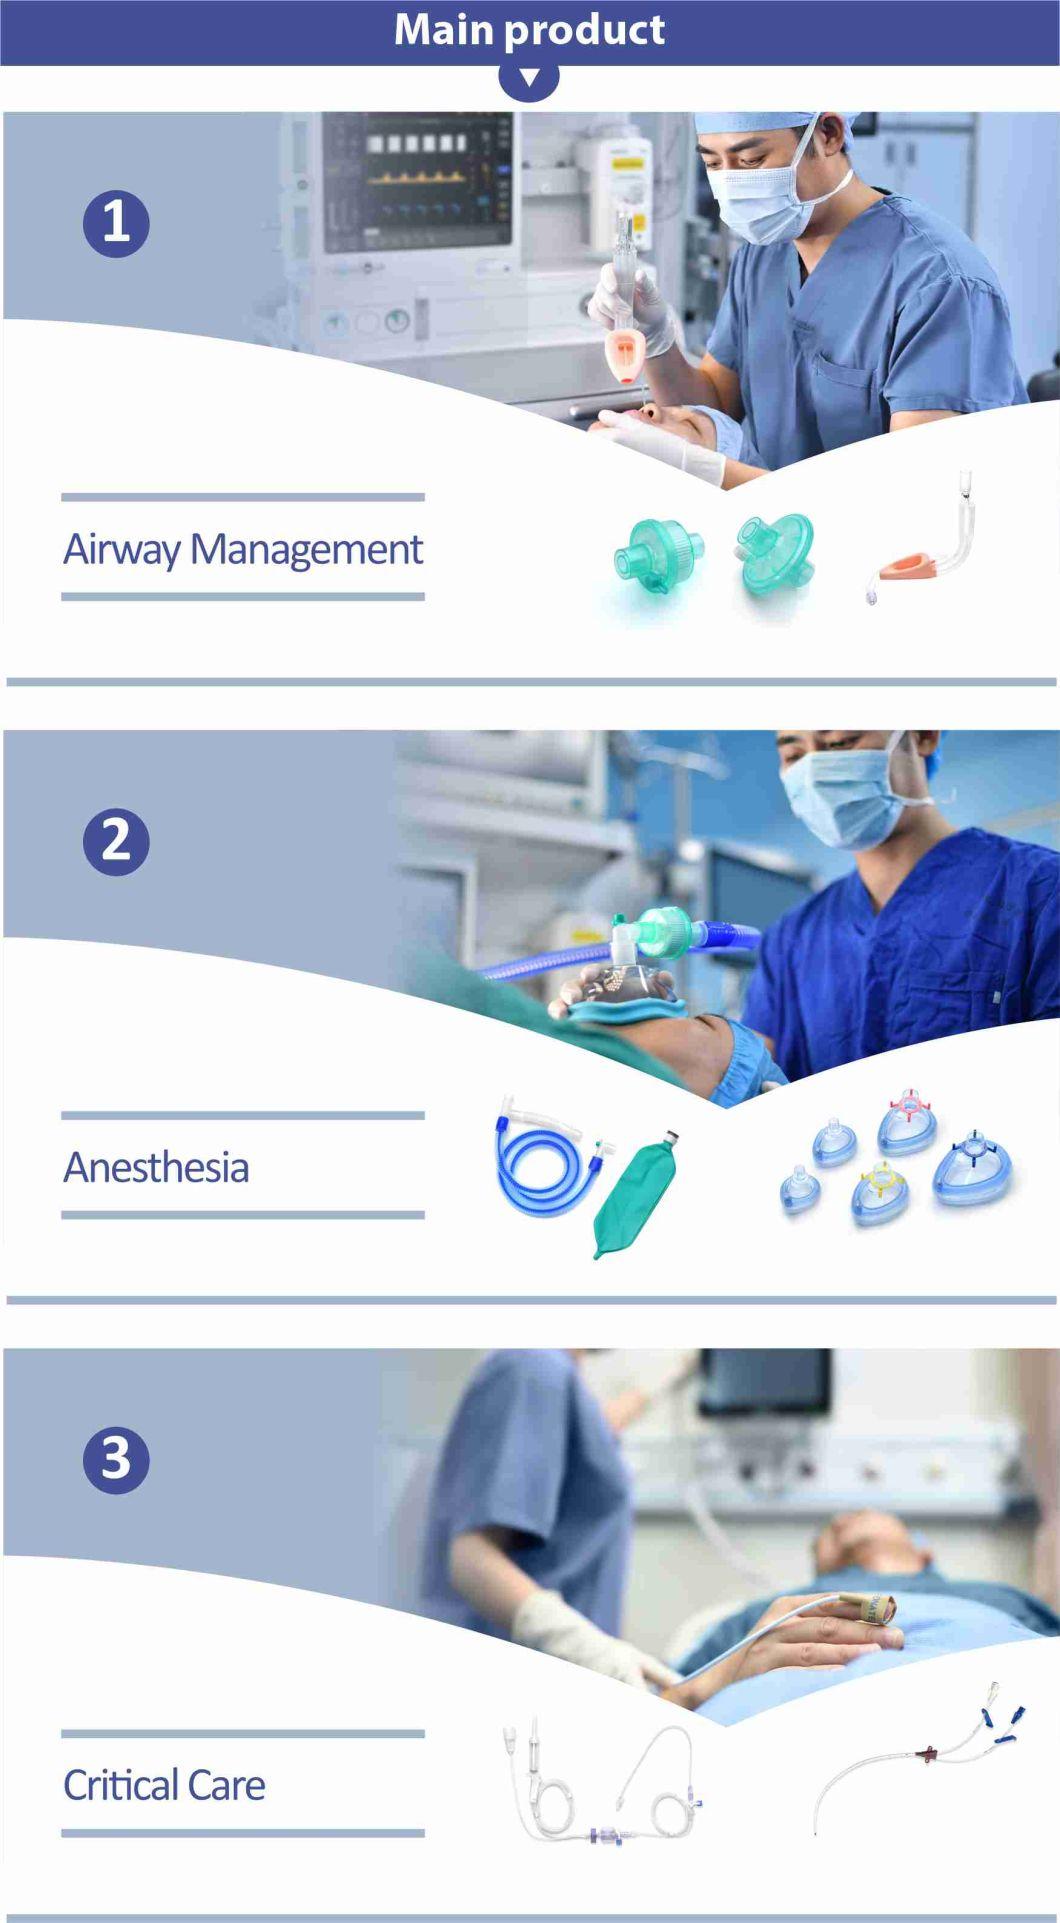 Disposable Laryngeal Mask Airway (Classic)